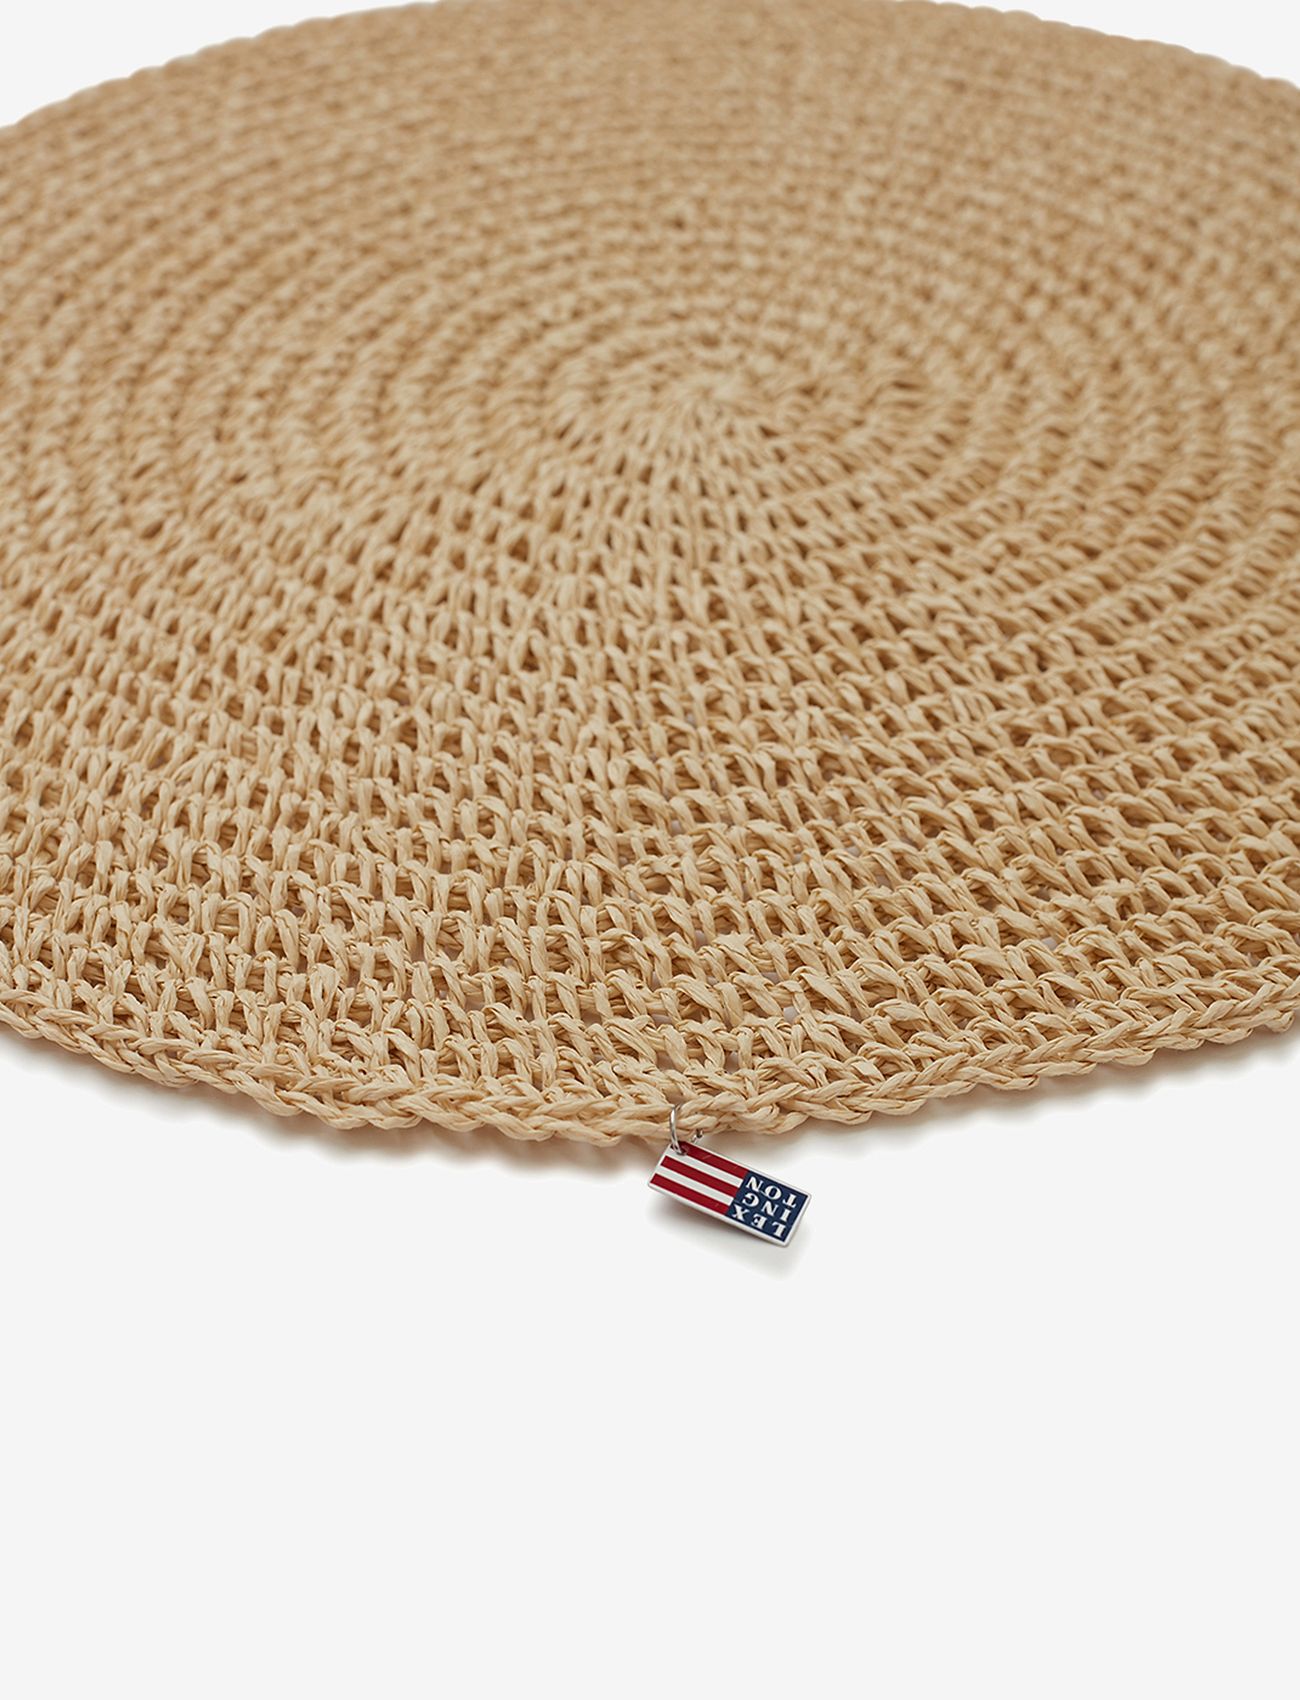 Lexington Home - Round Recycled Paper Straw Placemat - die niedrigsten preise - natural - 1